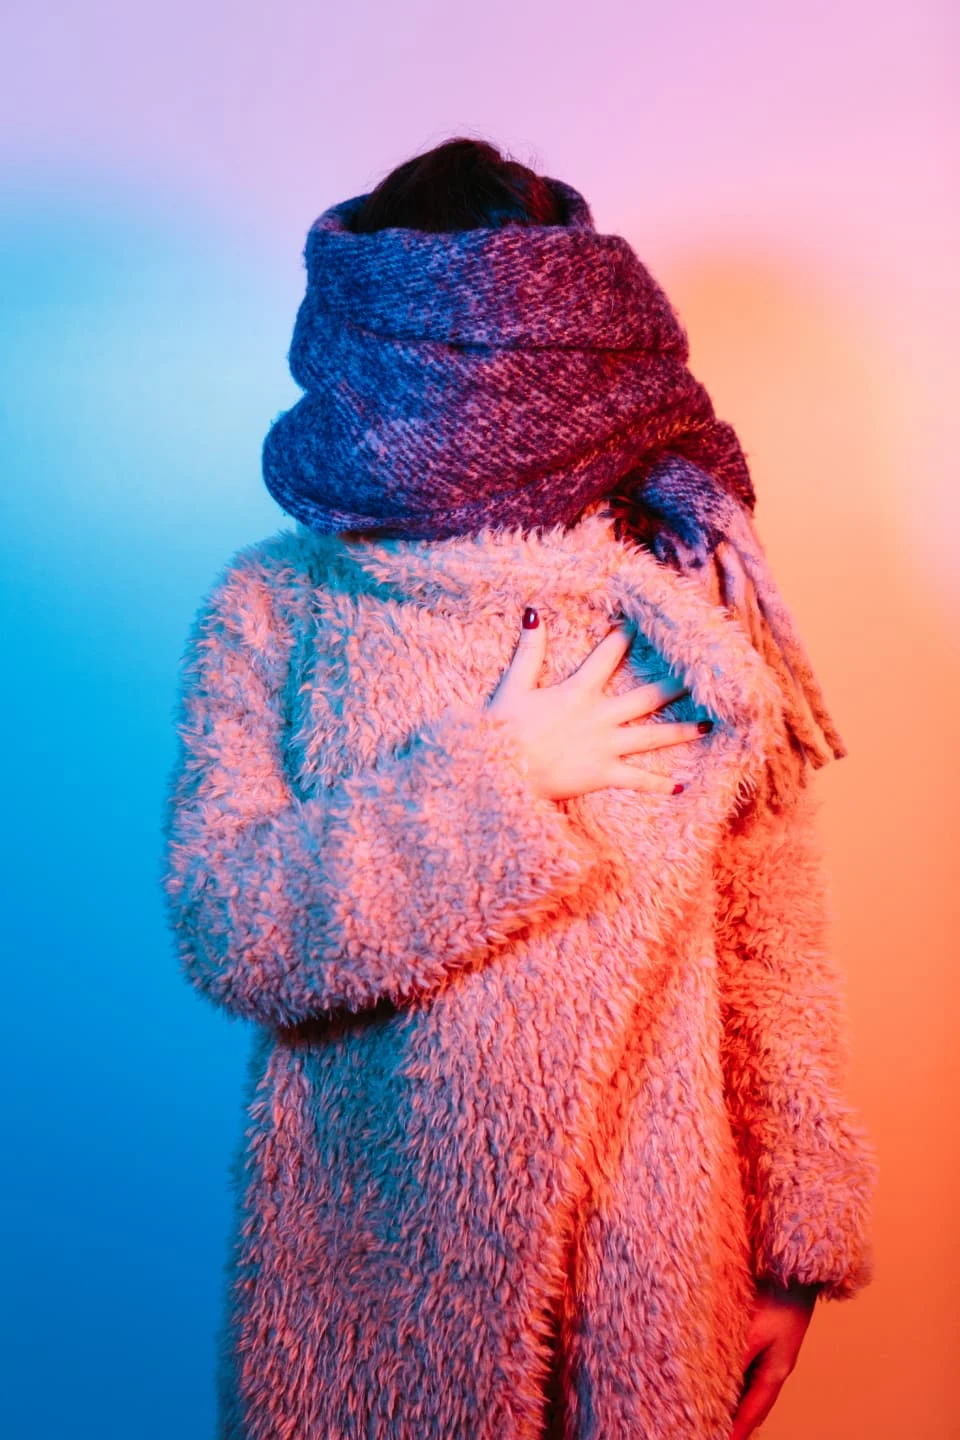 Lady covering face with a scarf